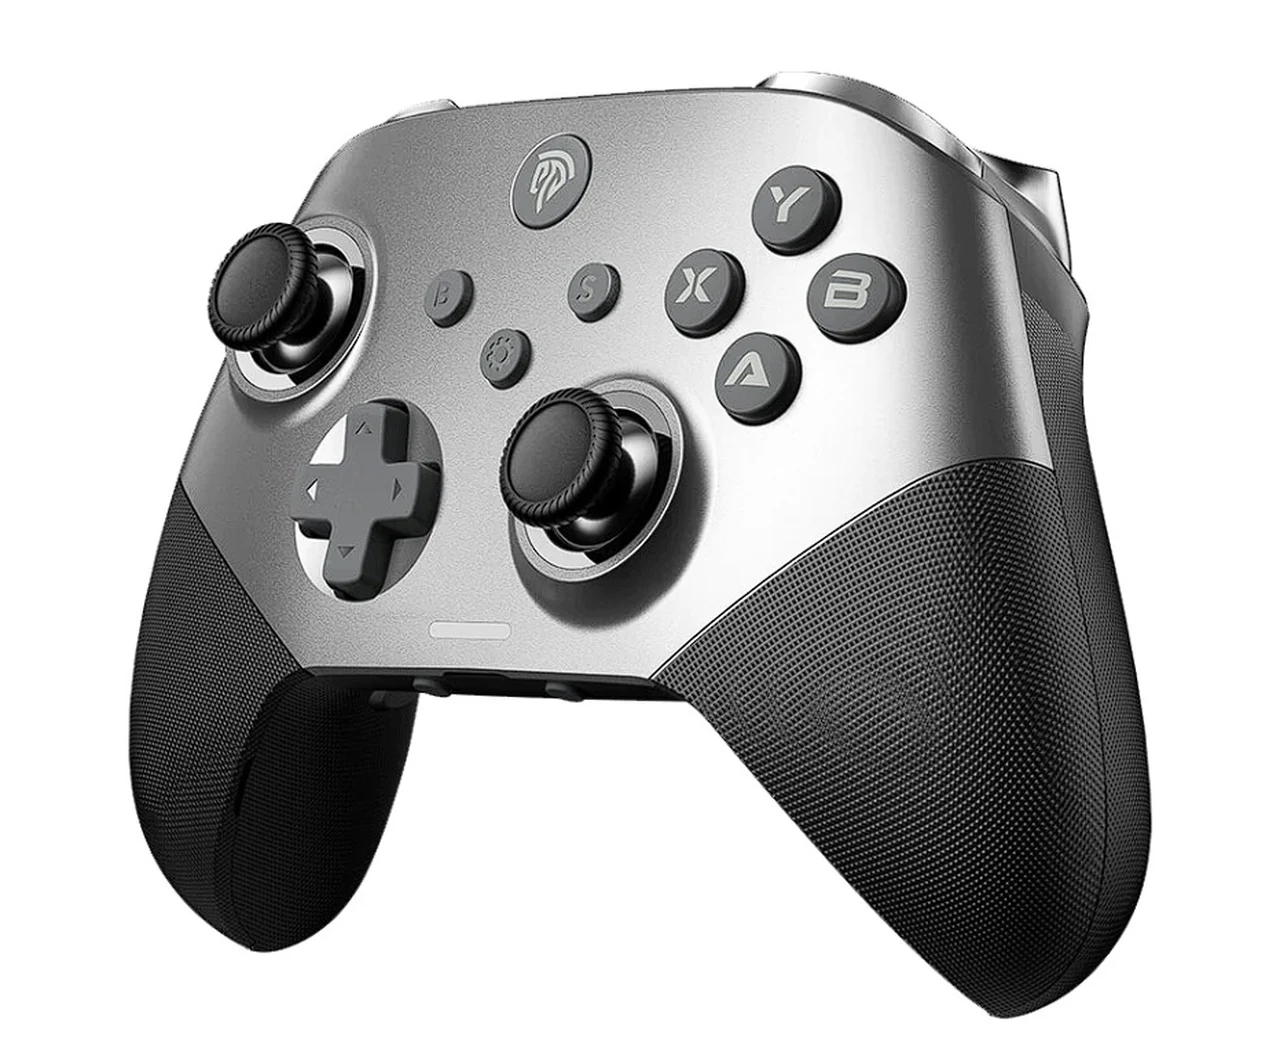 EasySMX gaming controller